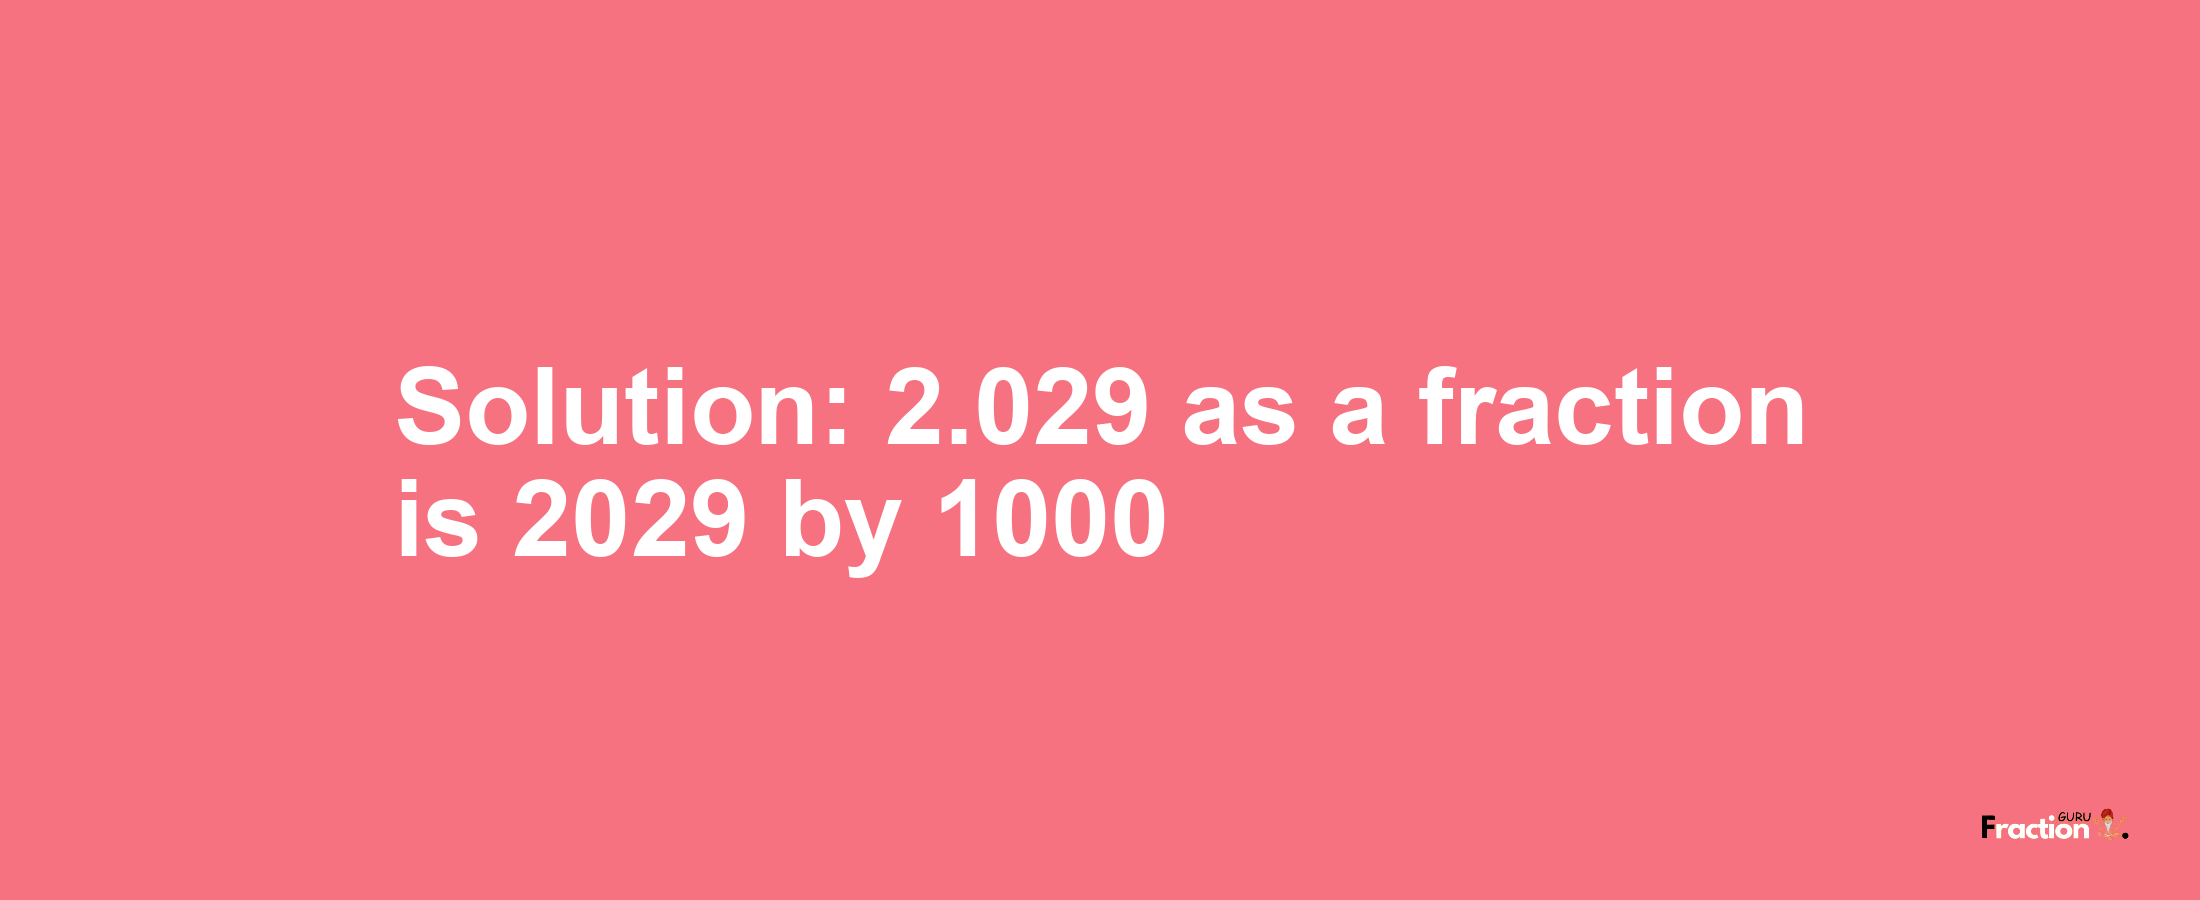 Solution:2.029 as a fraction is 2029/1000